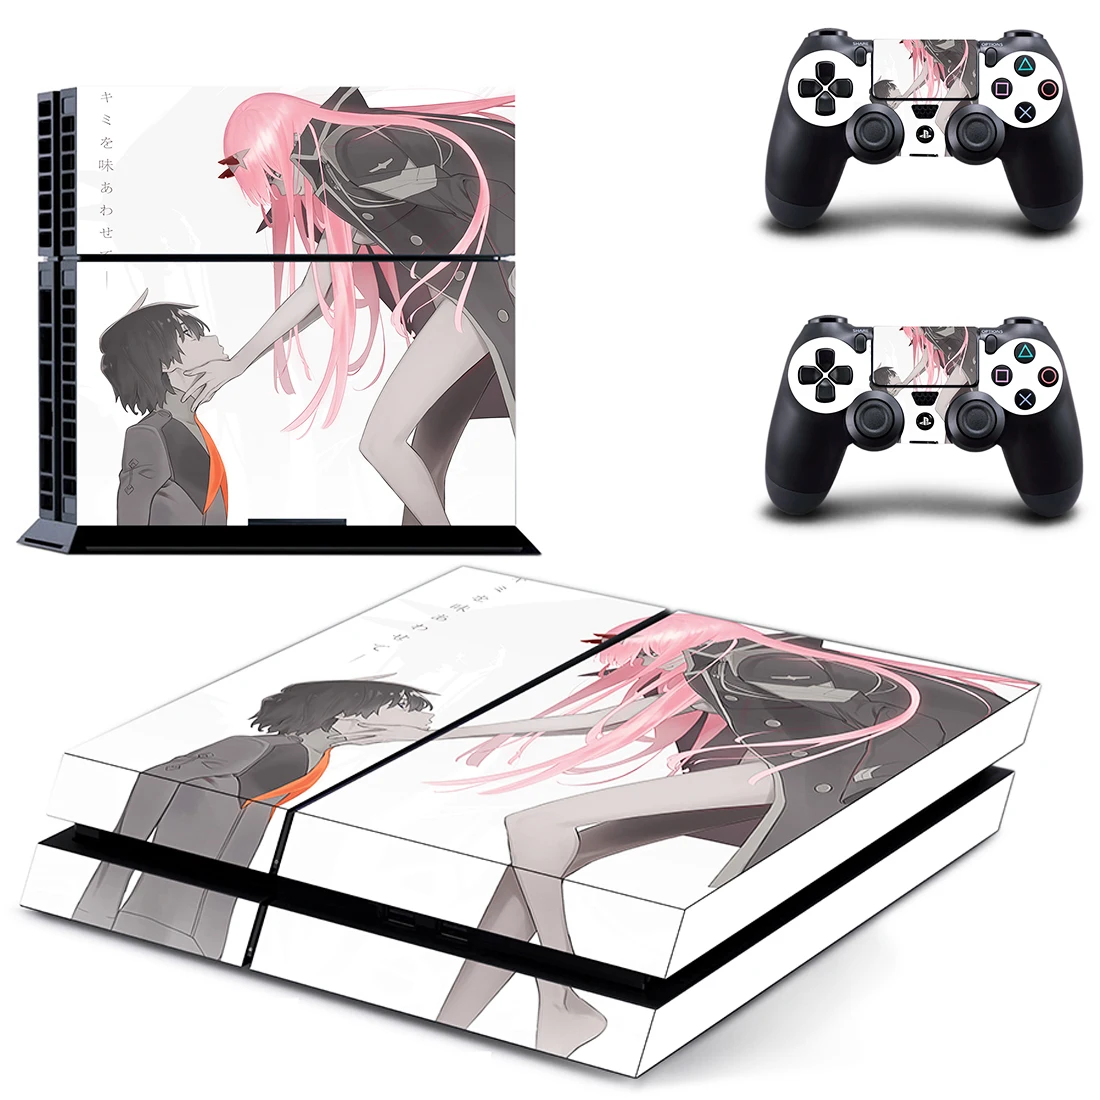 

DARLING in the FRANXX Zero Two PS4 Skin Sticker Decal Cover For PlayStation 4 Console & Controller Skins Vinyl